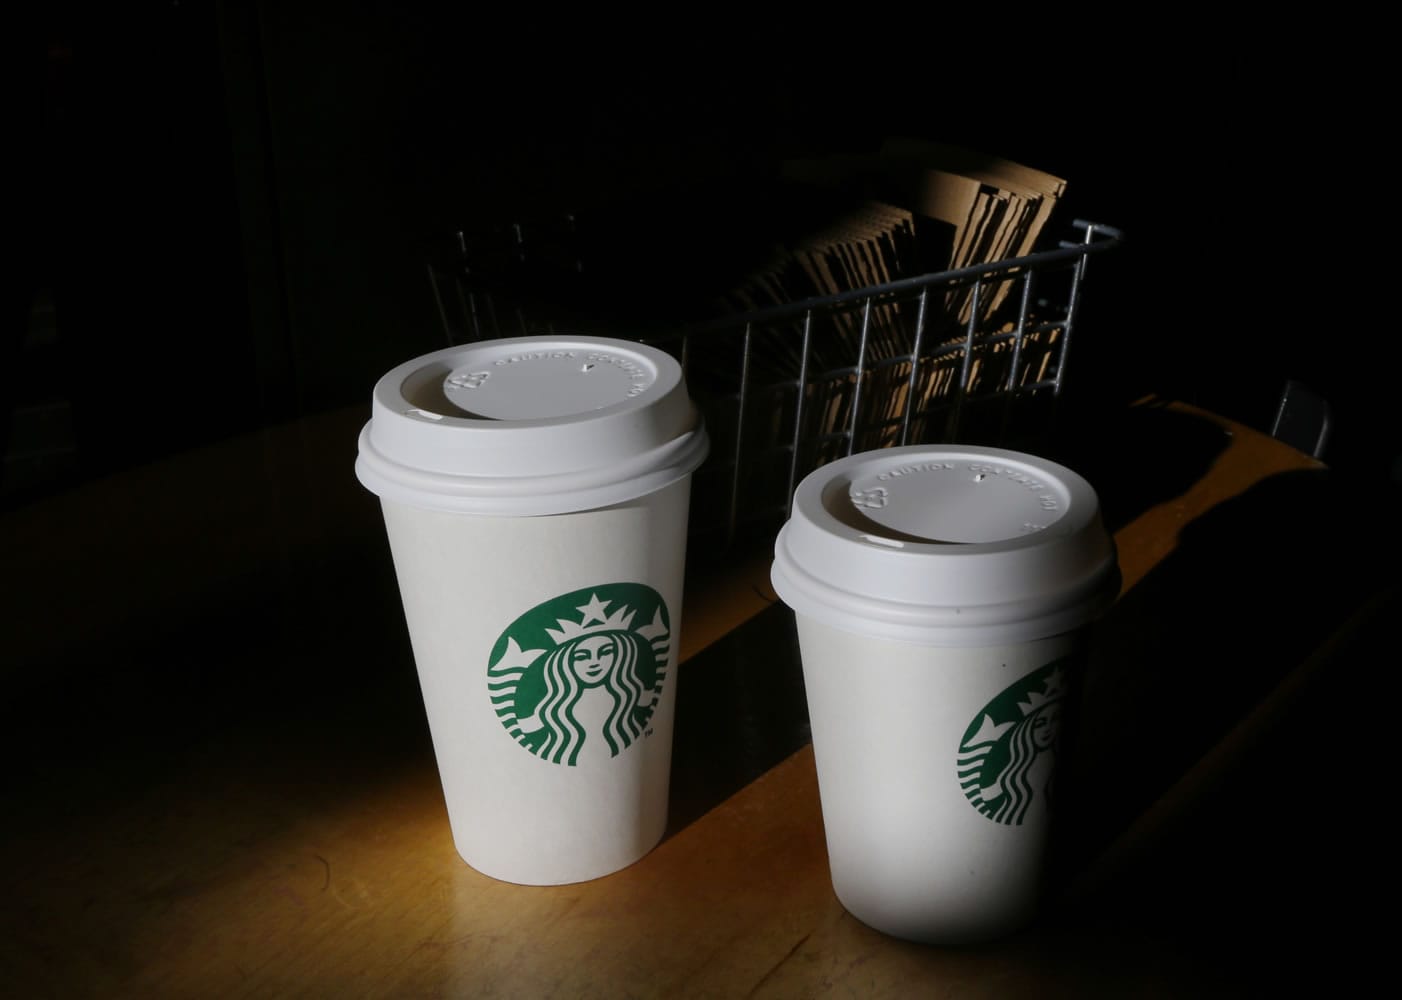 An arbitrator concluded on Tuesday that Starbucks must pay $2.76 billion to settle a dispute with Kraft over coffee distribution.